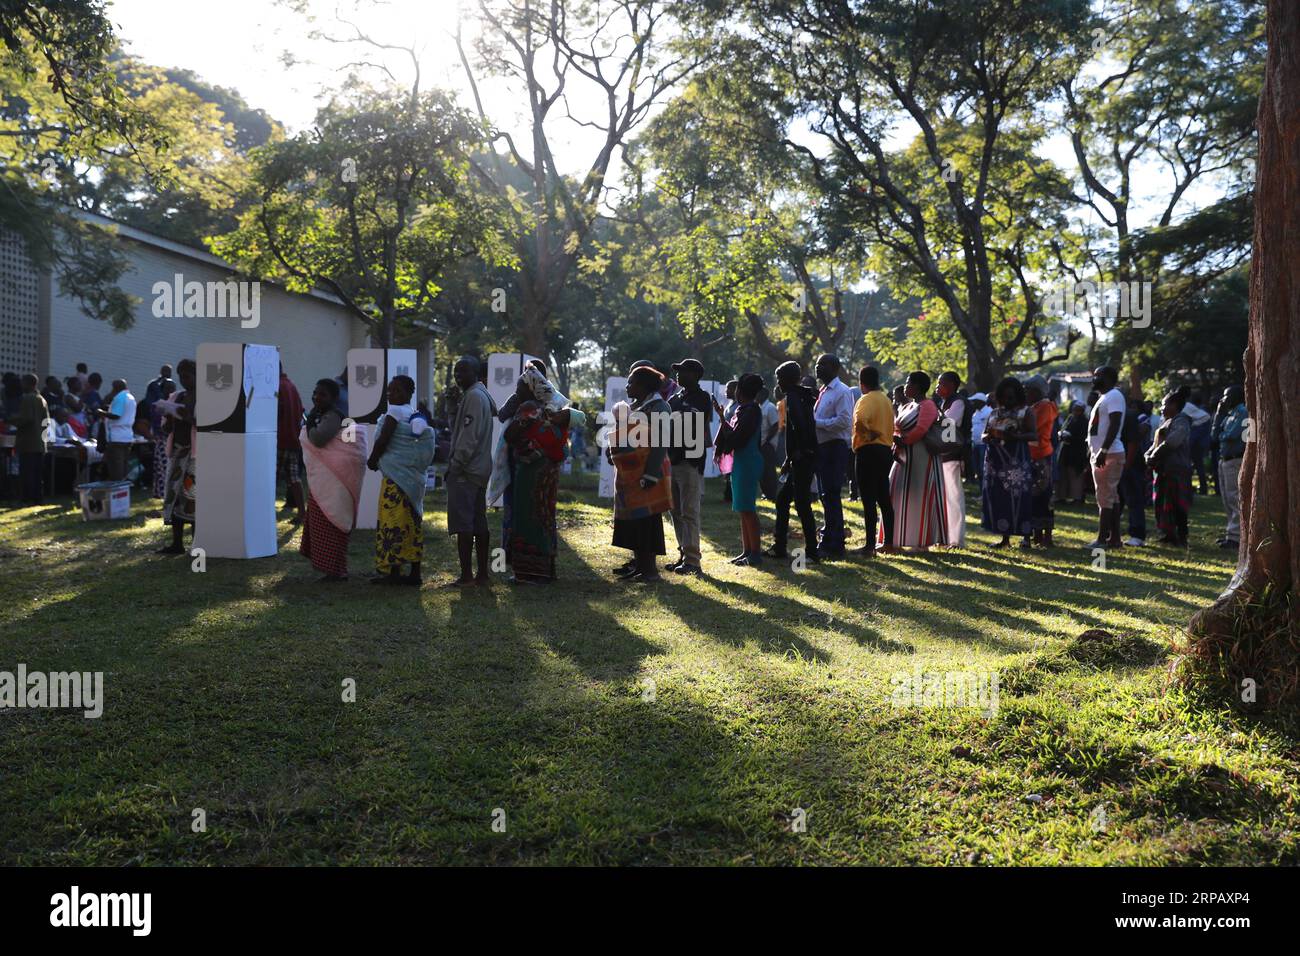 190521 -- BLANTYRE, May 21, 2019 Xinhua -- Voters wait to have their identities checked at Blantyre Secondary School Polling Station in Blantyre, Malawi, May 21, 2019. Malawians across the country on Tuesday queued up to cast ballots that will determine which party is to rule the country in the next five years. Xinhua/Peng Lijun MALAWI-BLANTYRE-ELECTION-VOTE PUBLICATIONxNOTxINxCHN Stock Photo